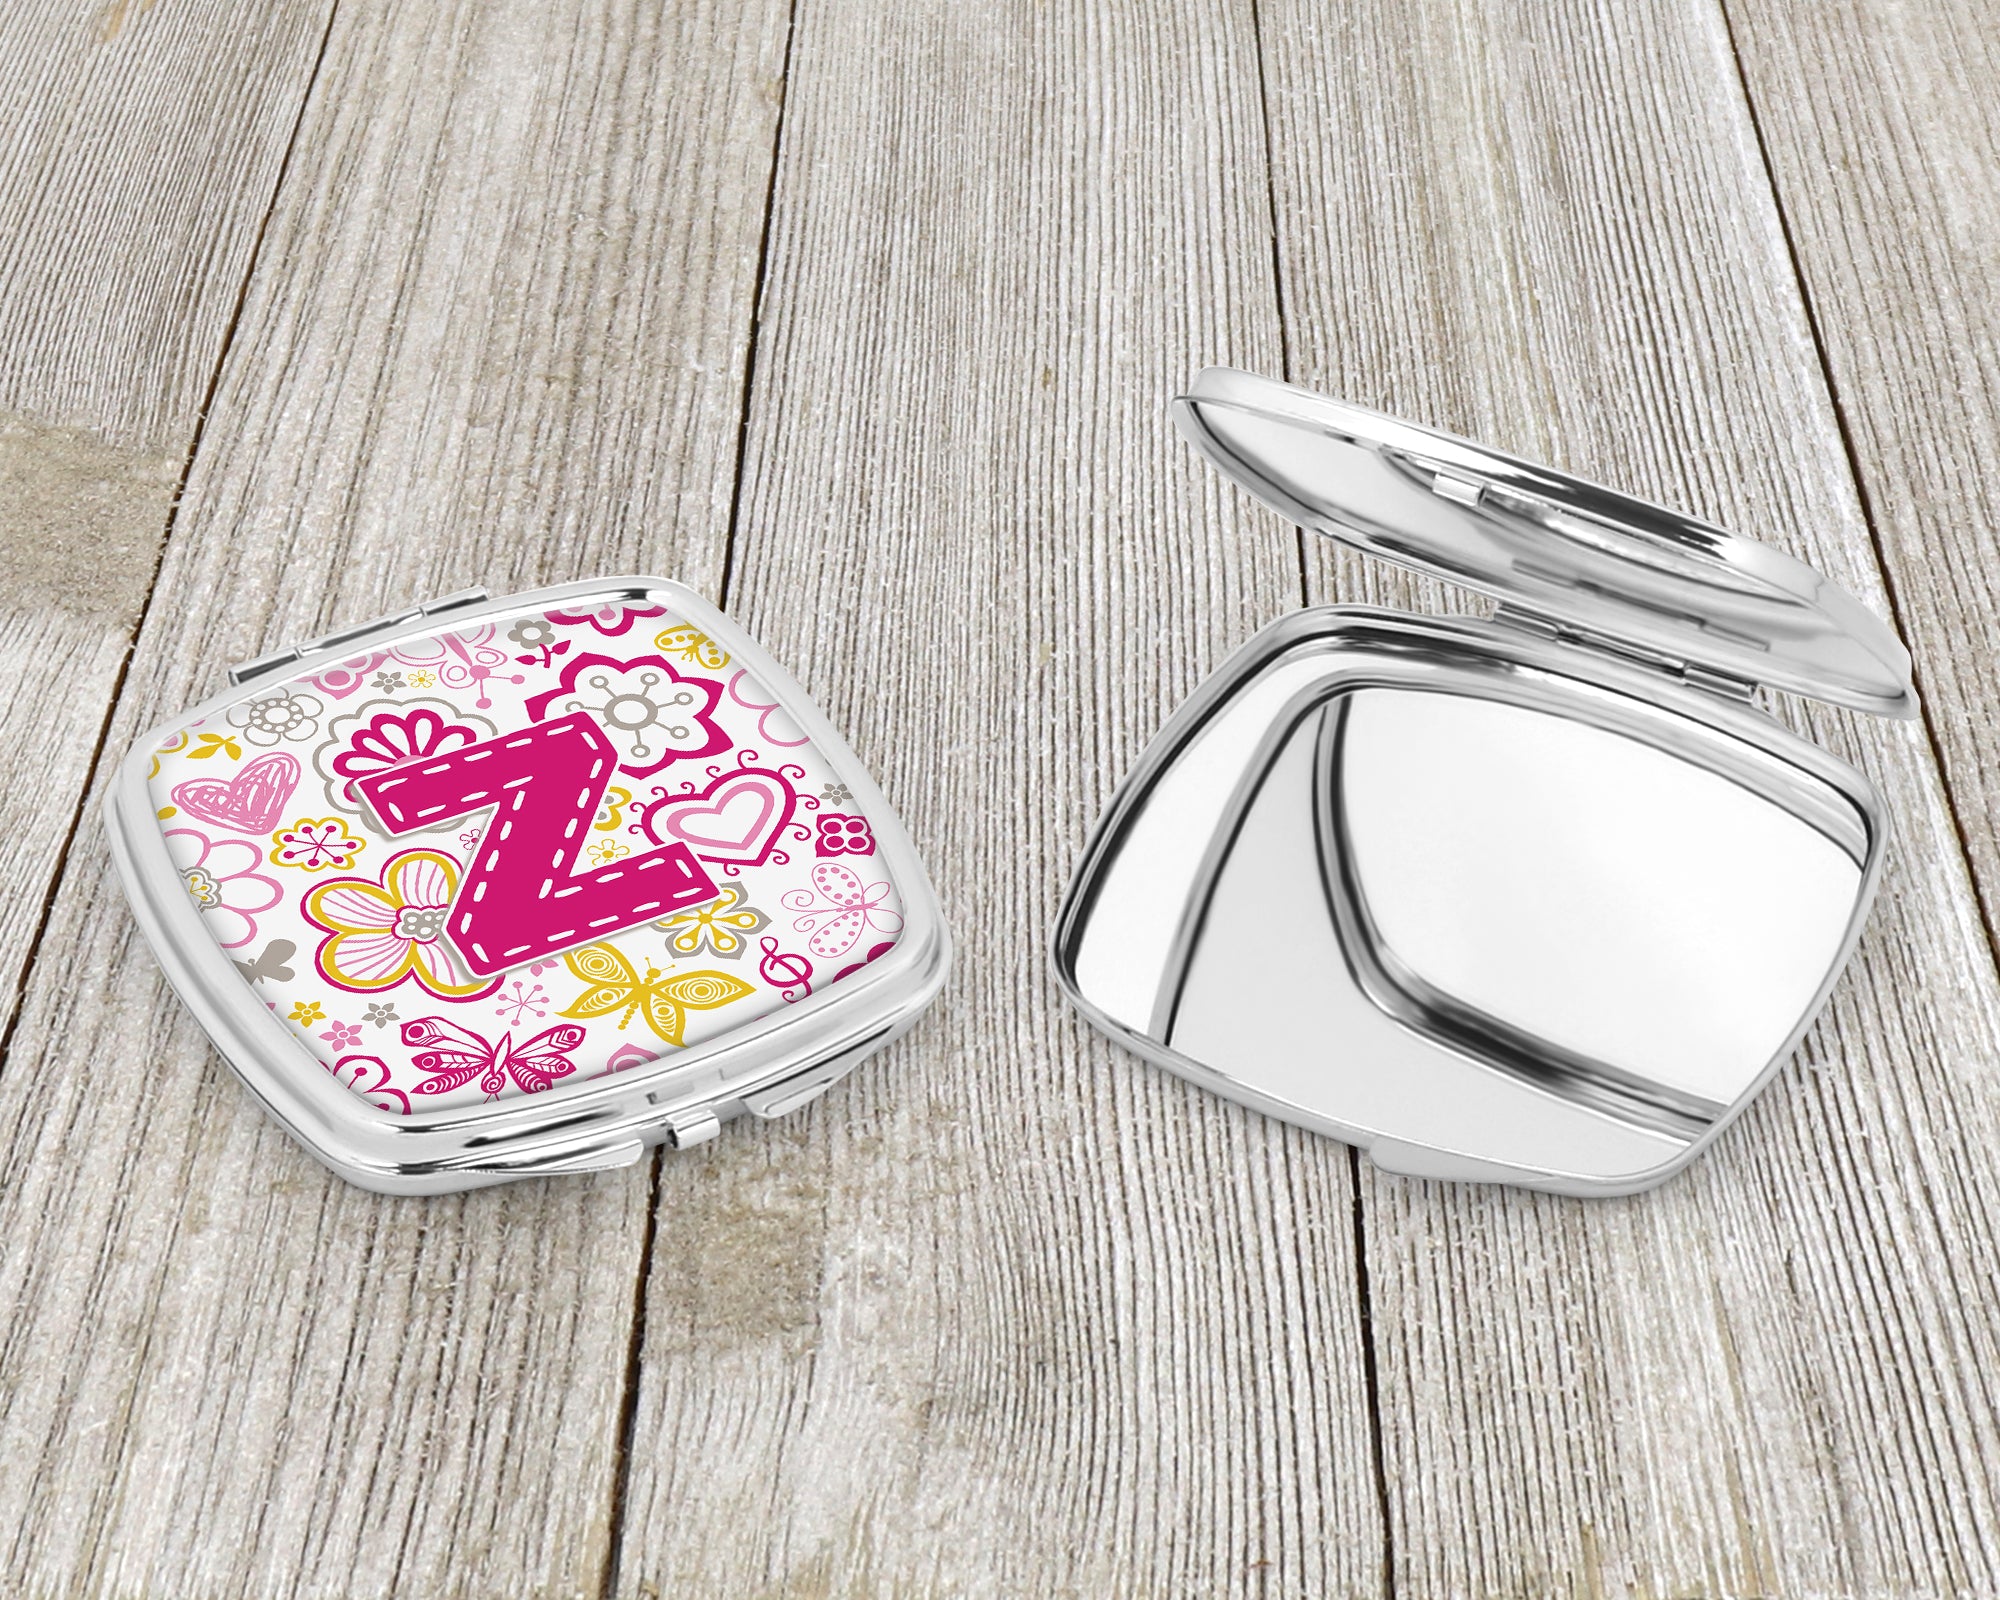 Letter Z Flowers and Butterflies Pink Compact Mirror CJ2005-ZSCM